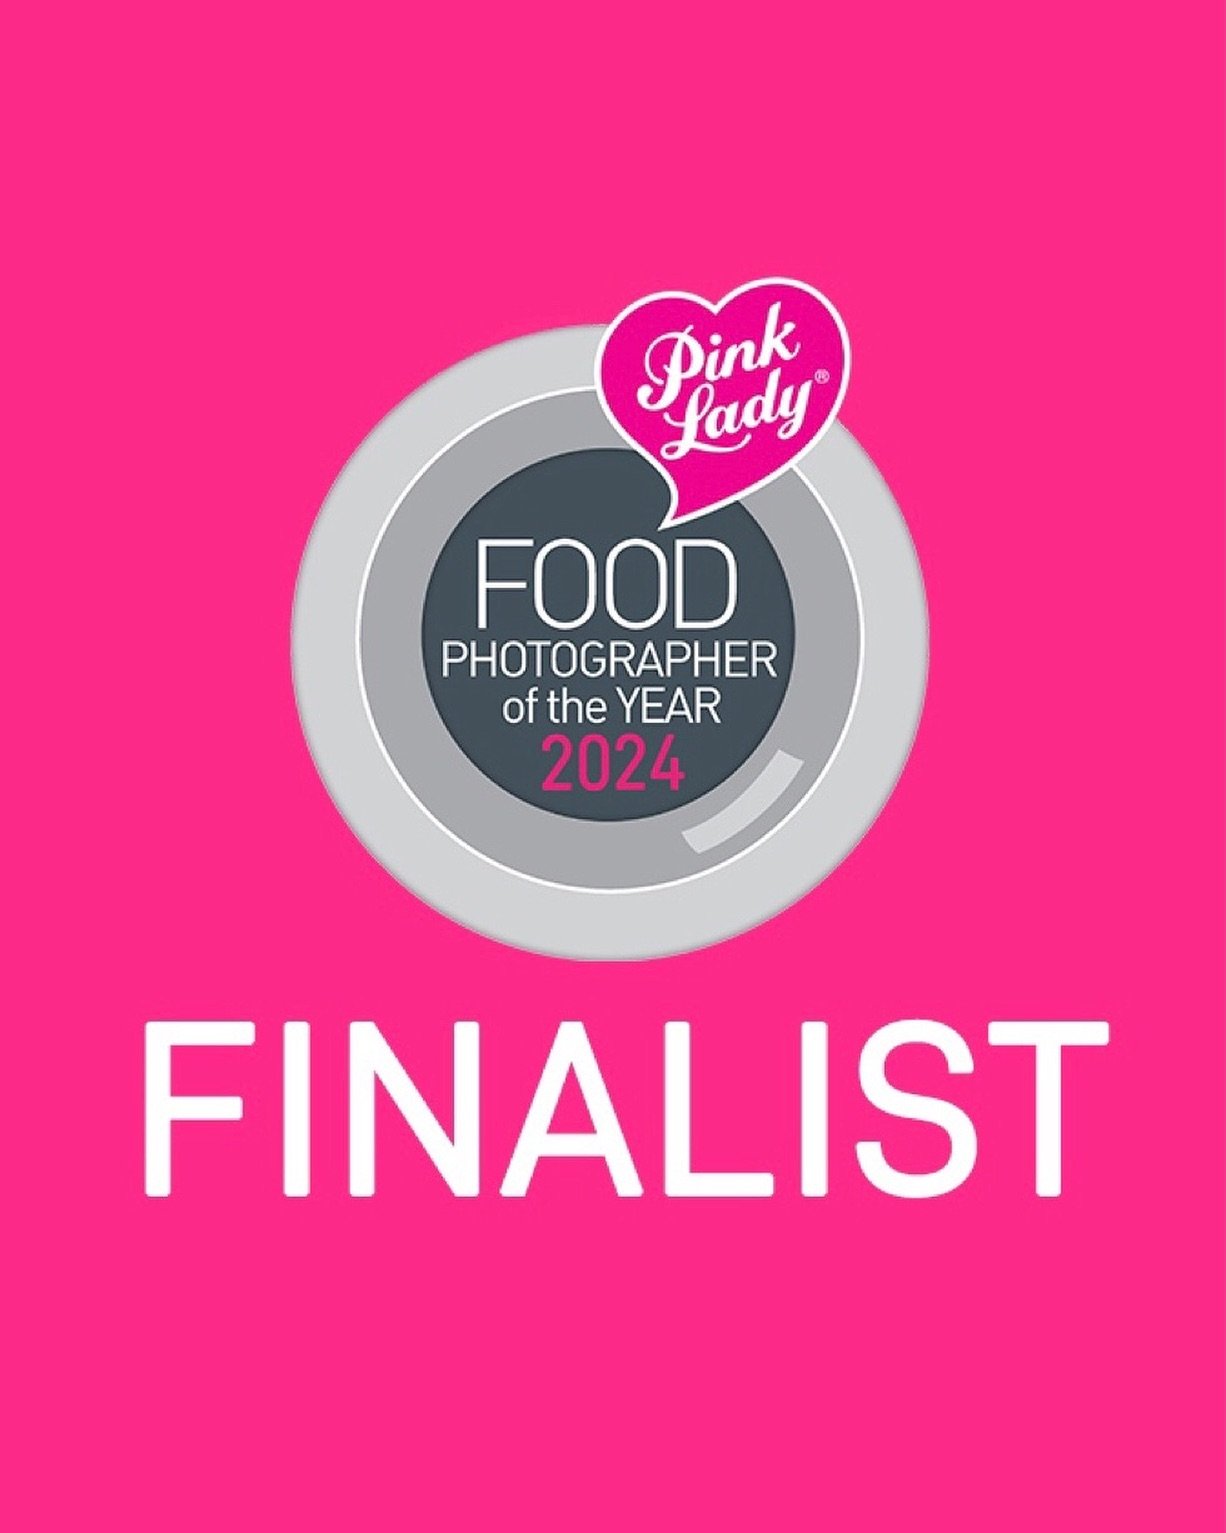 Overjoyed that I am a finalist in this years @foodphotoaward and that my work will be exhibited in the @mallgalleries 💖 I cannot wait to reveal the shortlisted shot 🤫 

@atrare.co #womeninphotography #photographyawards #pinkladyfoodphotographerofth